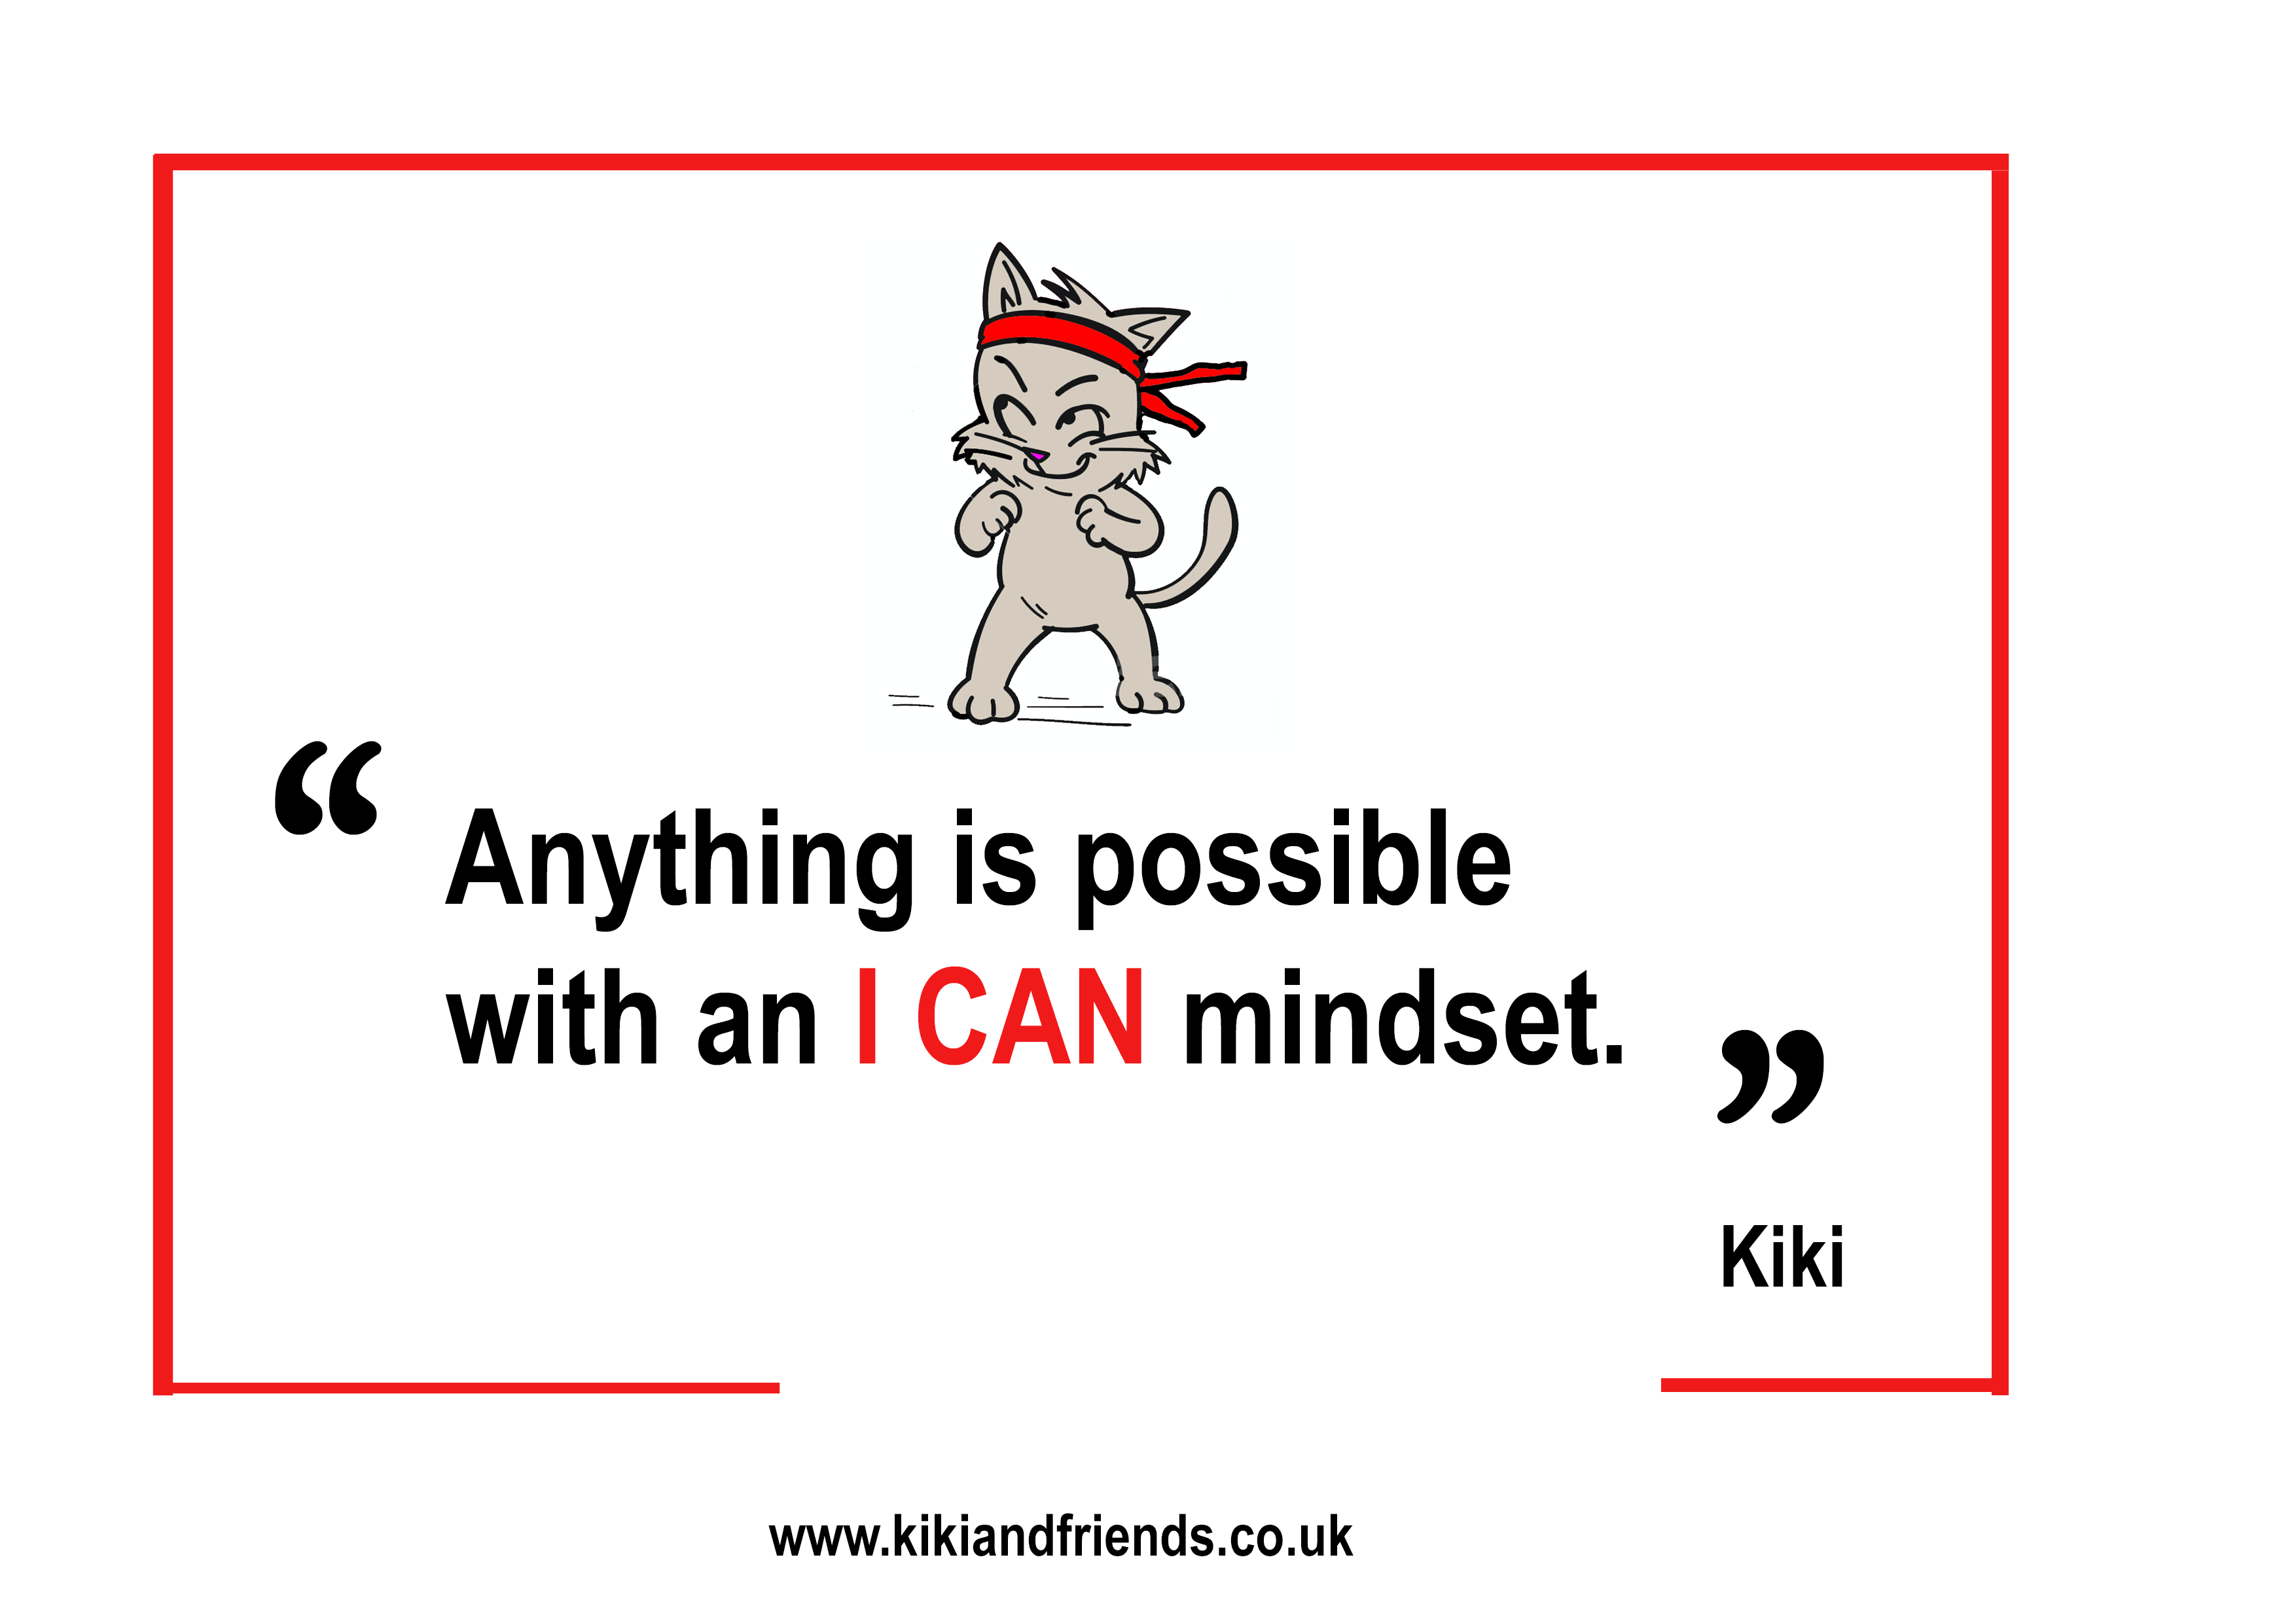 Kiki encourages an I CAN mindset because confidence opens doors, while self-doubt shuts them.